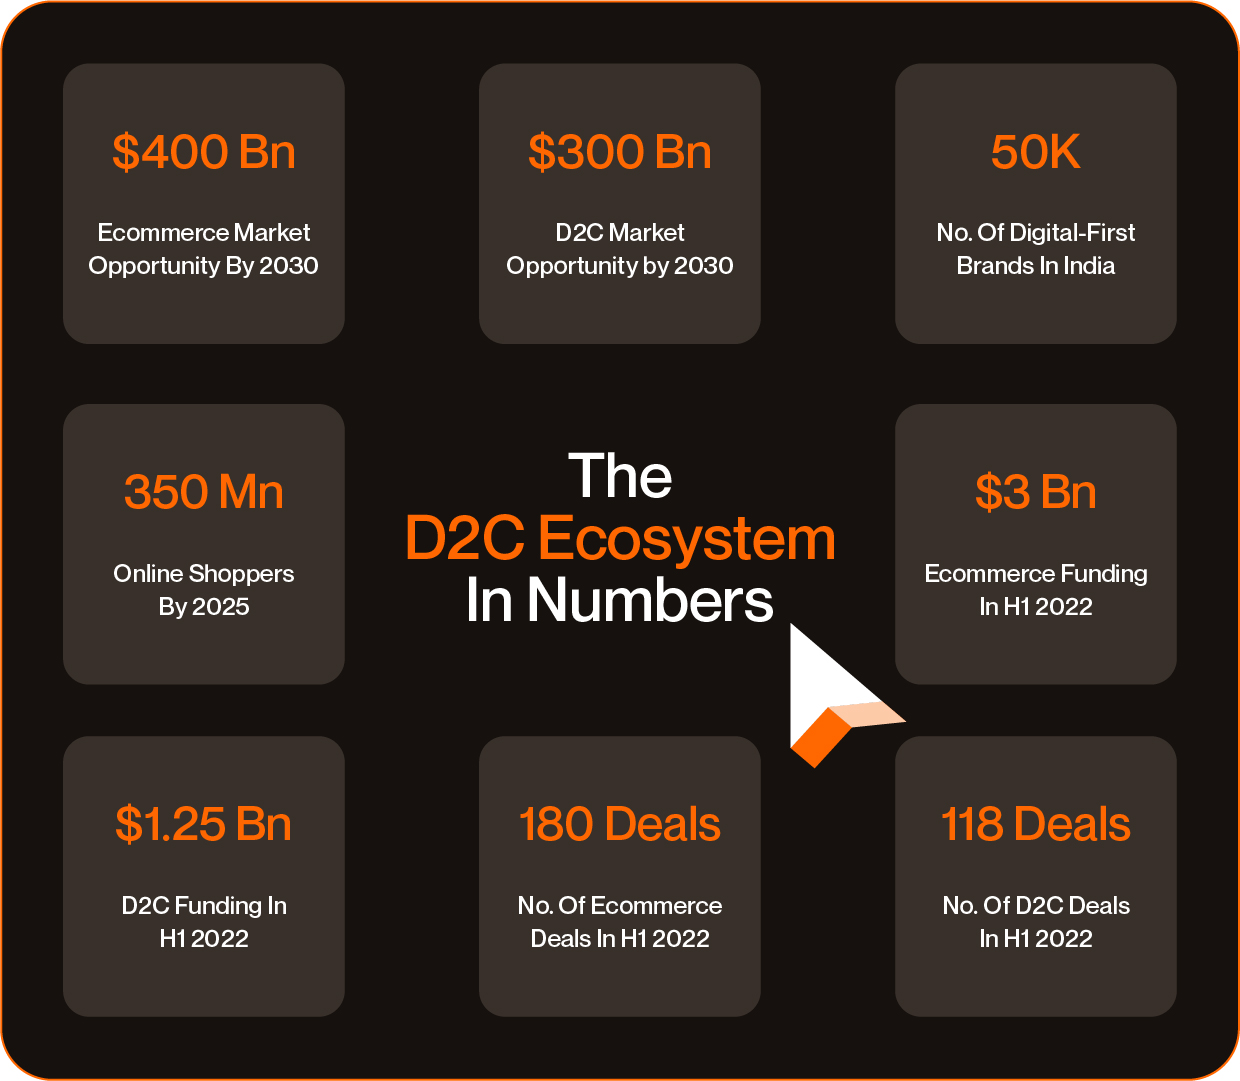 Announcing The D2C Summit 2022: India’s Largest Ecommerce And D2C Conference Is Back!